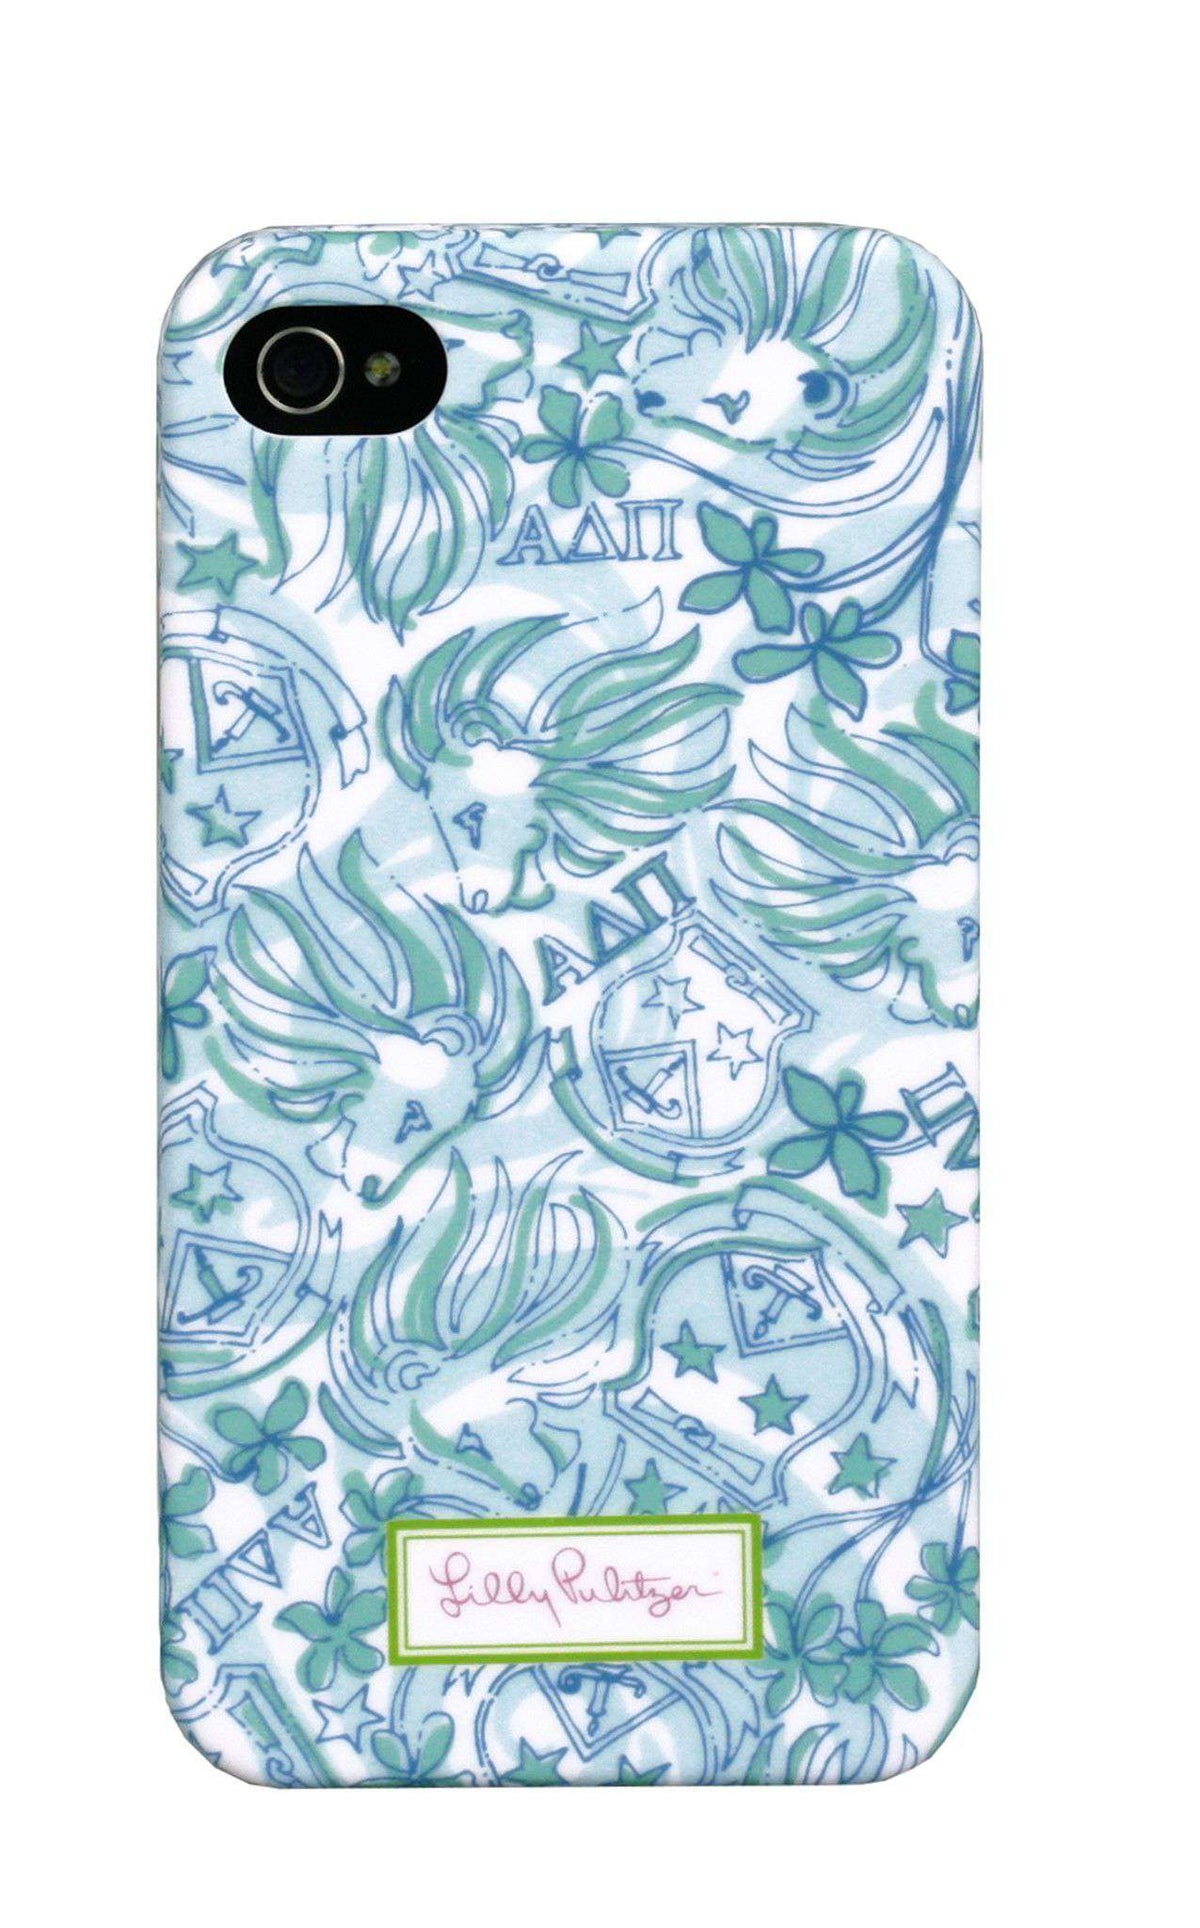 Alpha Delta Pi iPhone 4/4s Cover by Lilly Pulitzer - Country Club Prep